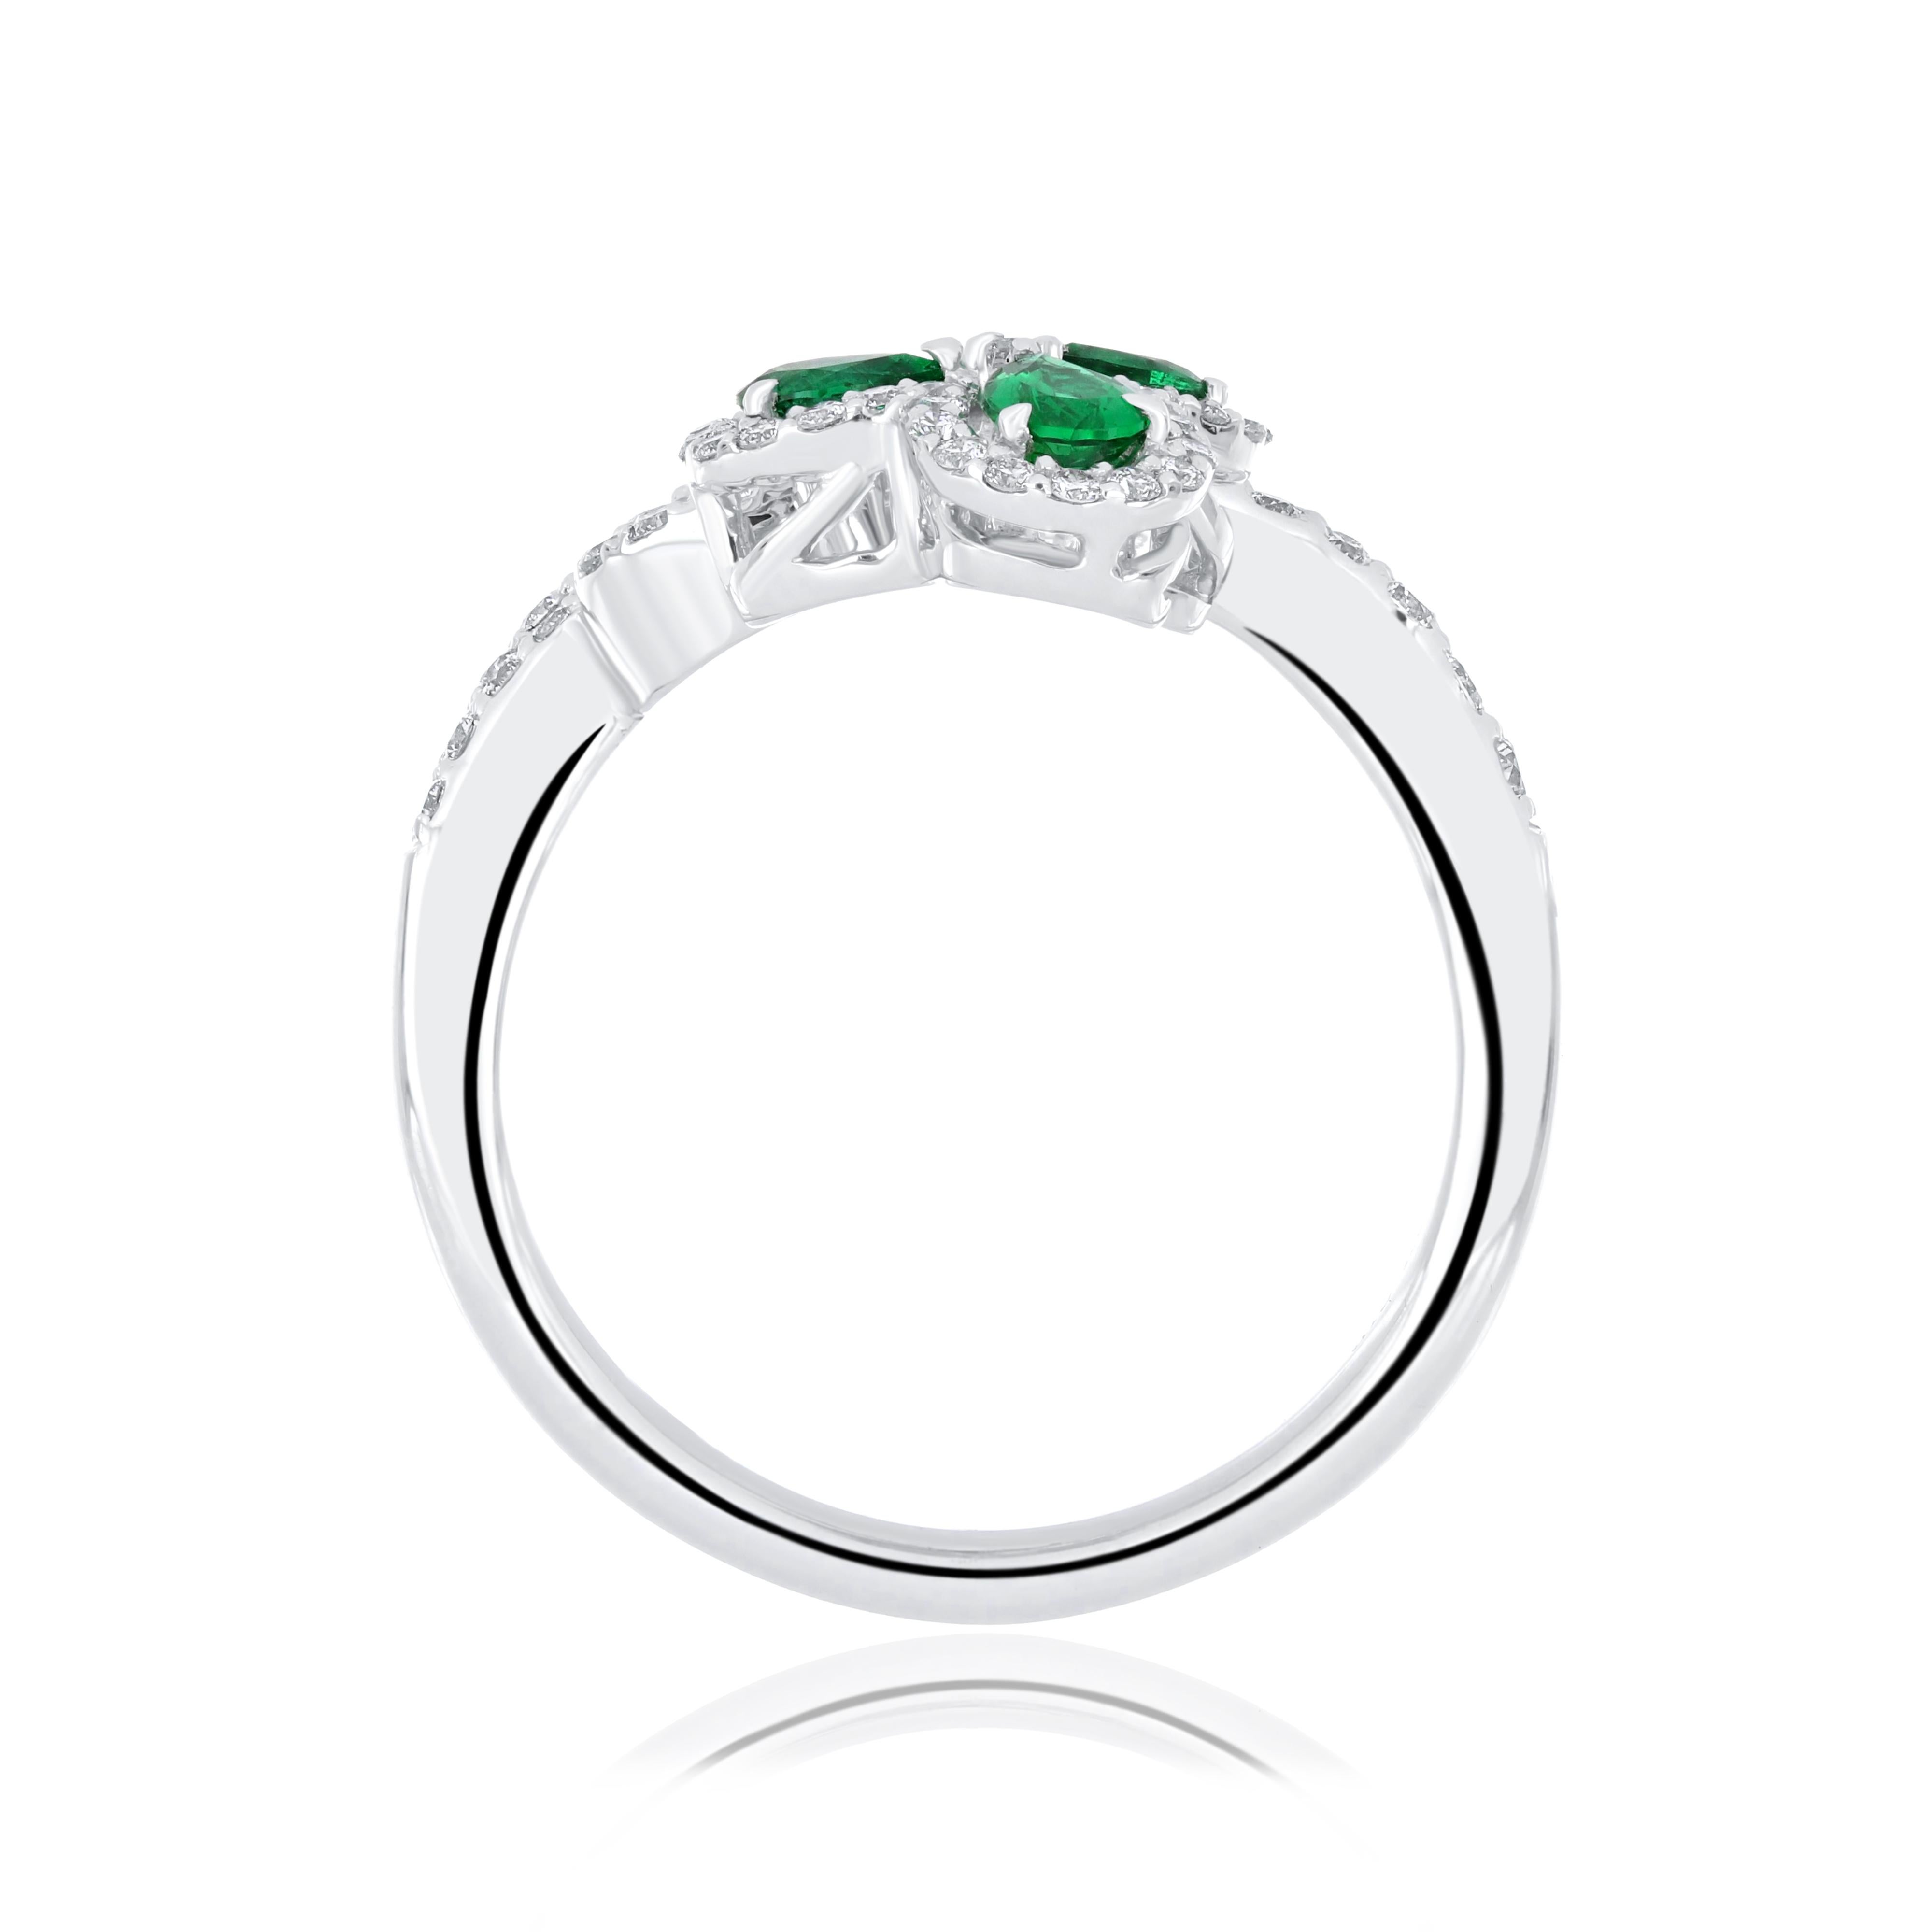 For Sale:  Emerald and Diamond Studded Ring 18 Karat White Gold jewelry handcraft Ring 5